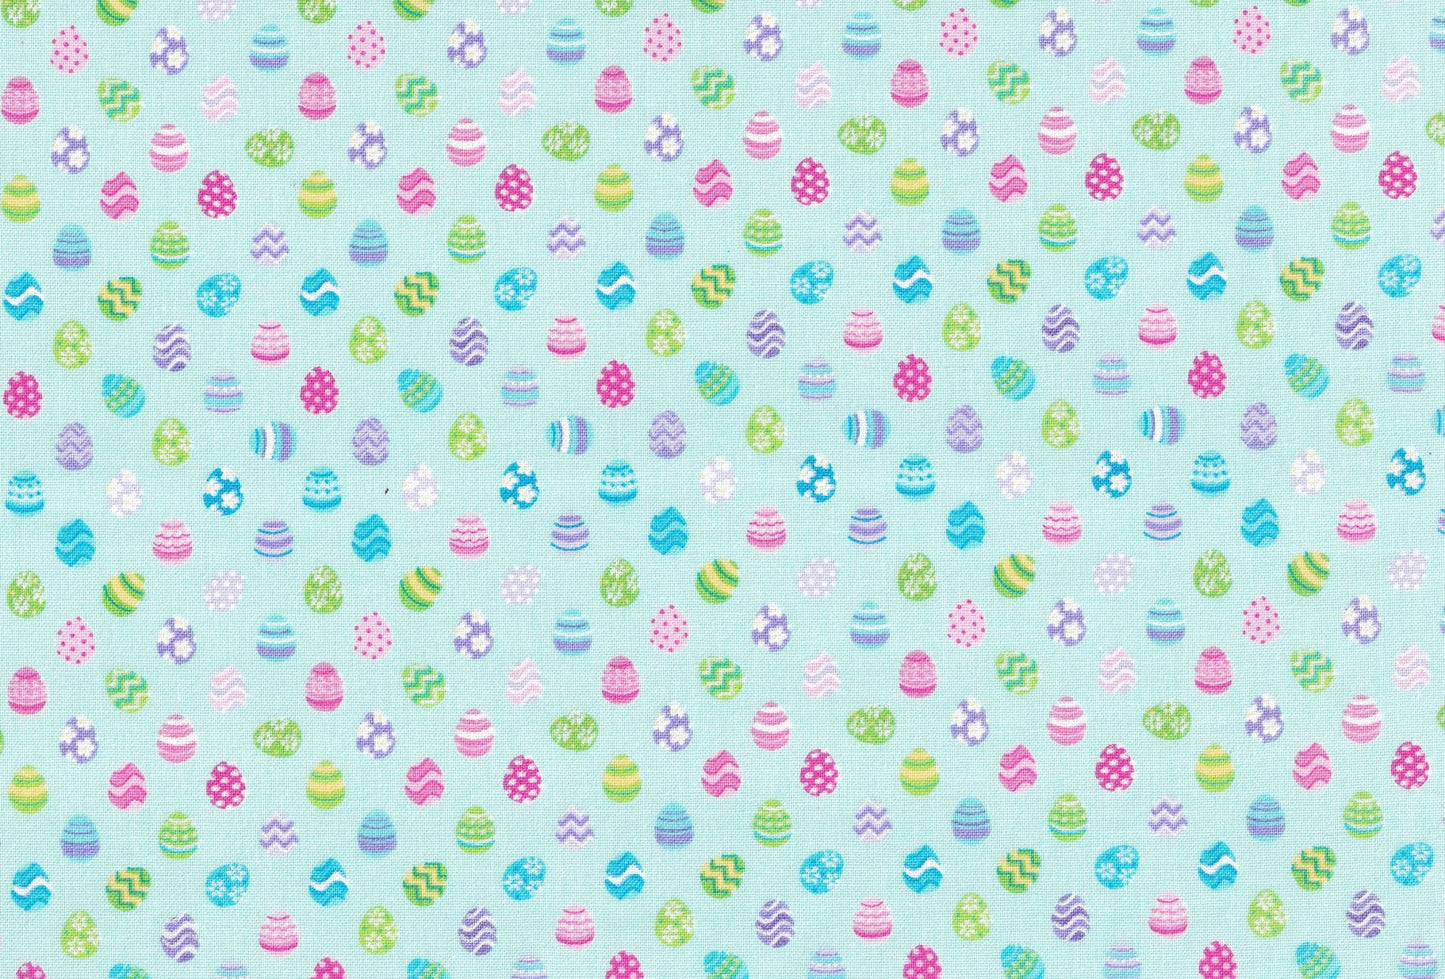 44 x 36 Easter Mini Tiny Patterned Eggs Light Green Fabric Traditions 100% Cotton